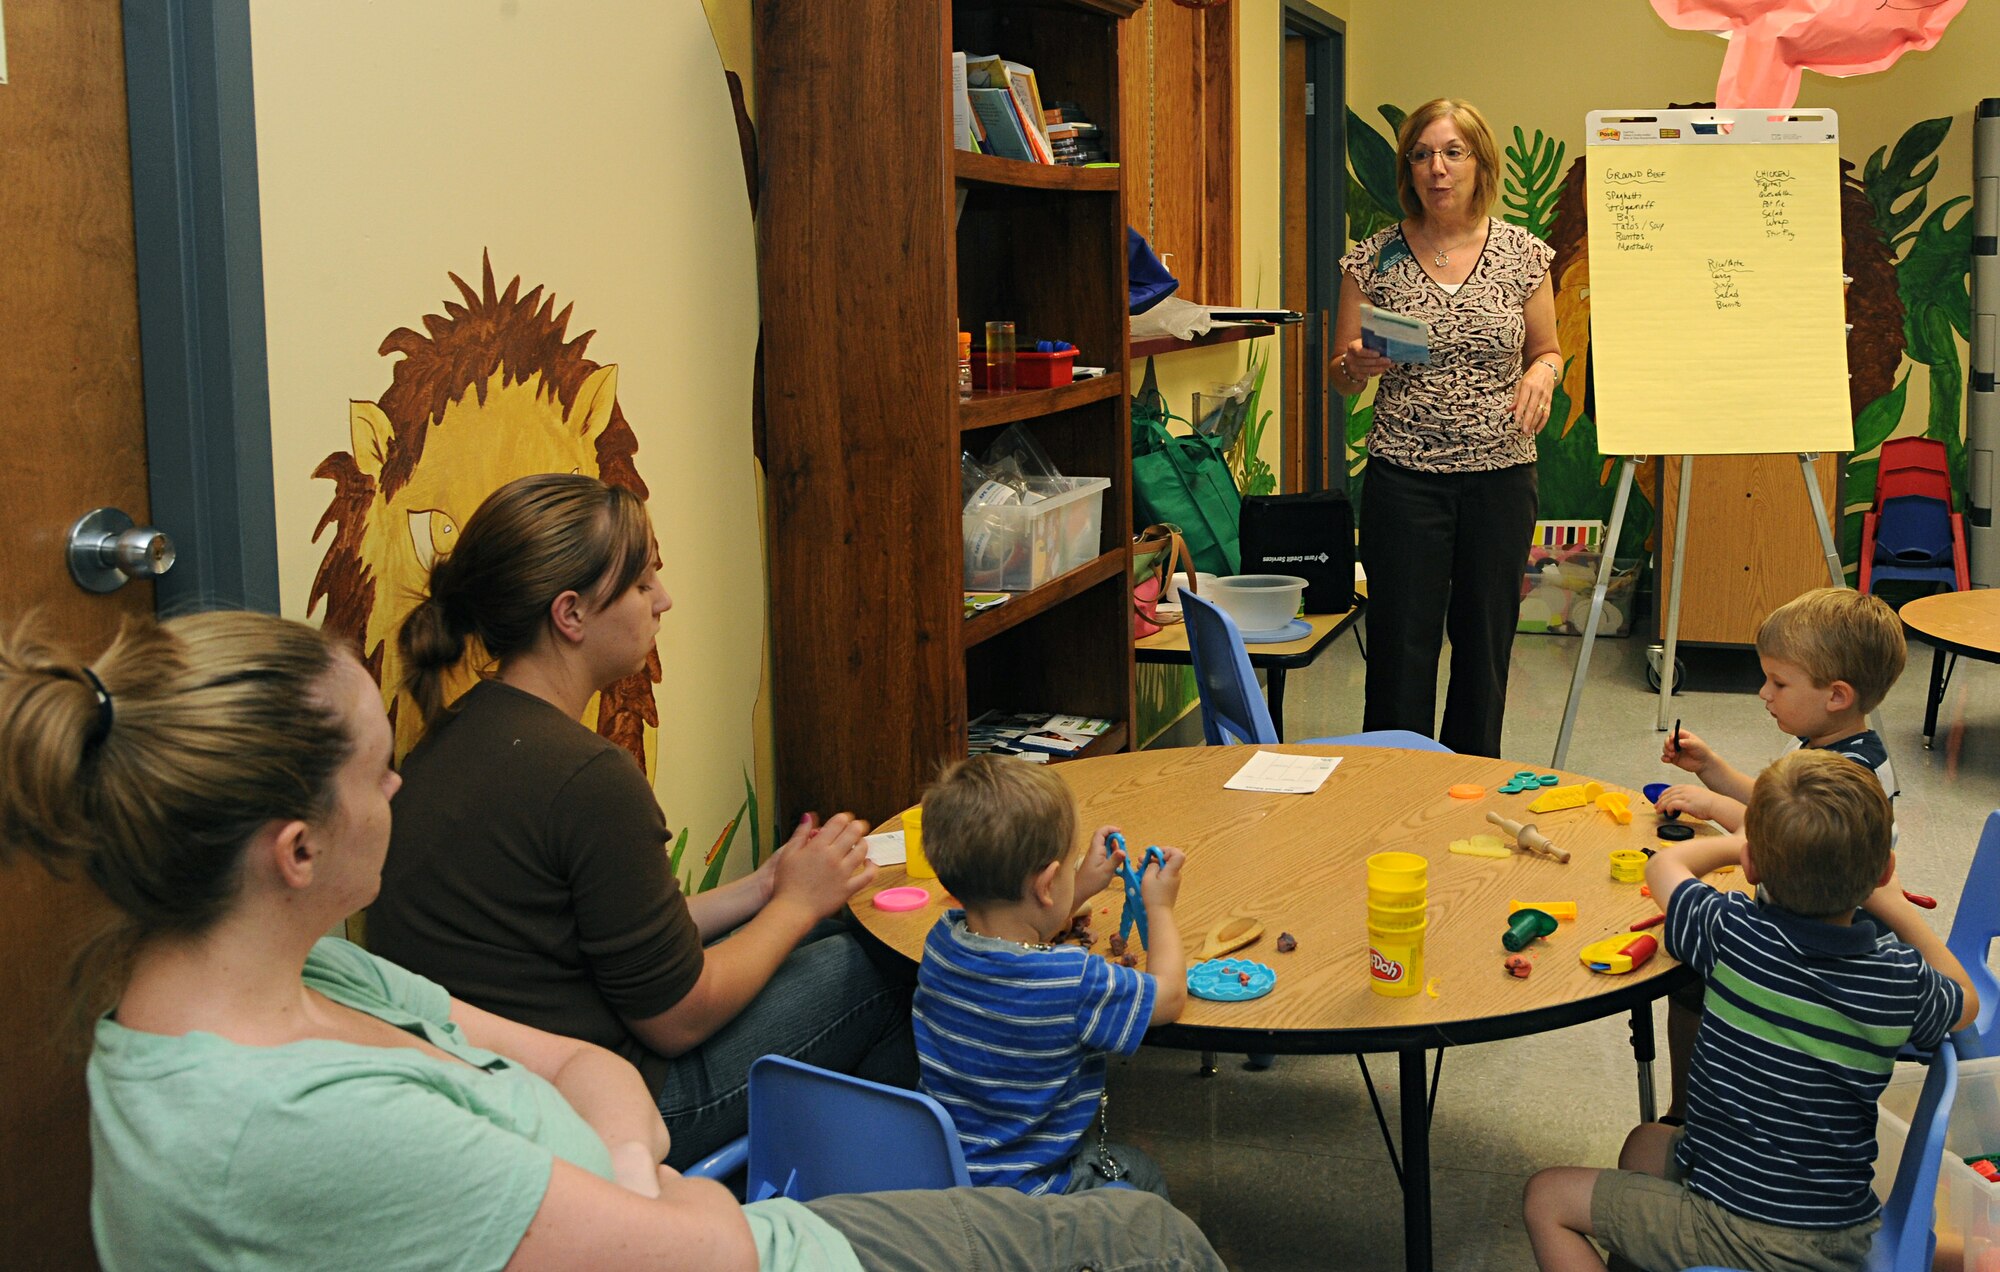 Jean Noland, Grand Forks Expanded Food Nutrition Education Program representative, speaks to parents at the Grand Forks Air Force Base Parent and Child Center, July 12, 2012. Noland is one of several briefers who visit the center periodically to educate parents on a range of topics from nutrition to general pediatrics. The center is open Monday through Friday, 9 to 11 a.m. and 1 to 3:30 p.m. For more information, call 701-747-3831 or 3241. (U.S. Air Force photo by Senior Airman Amber Bennett)